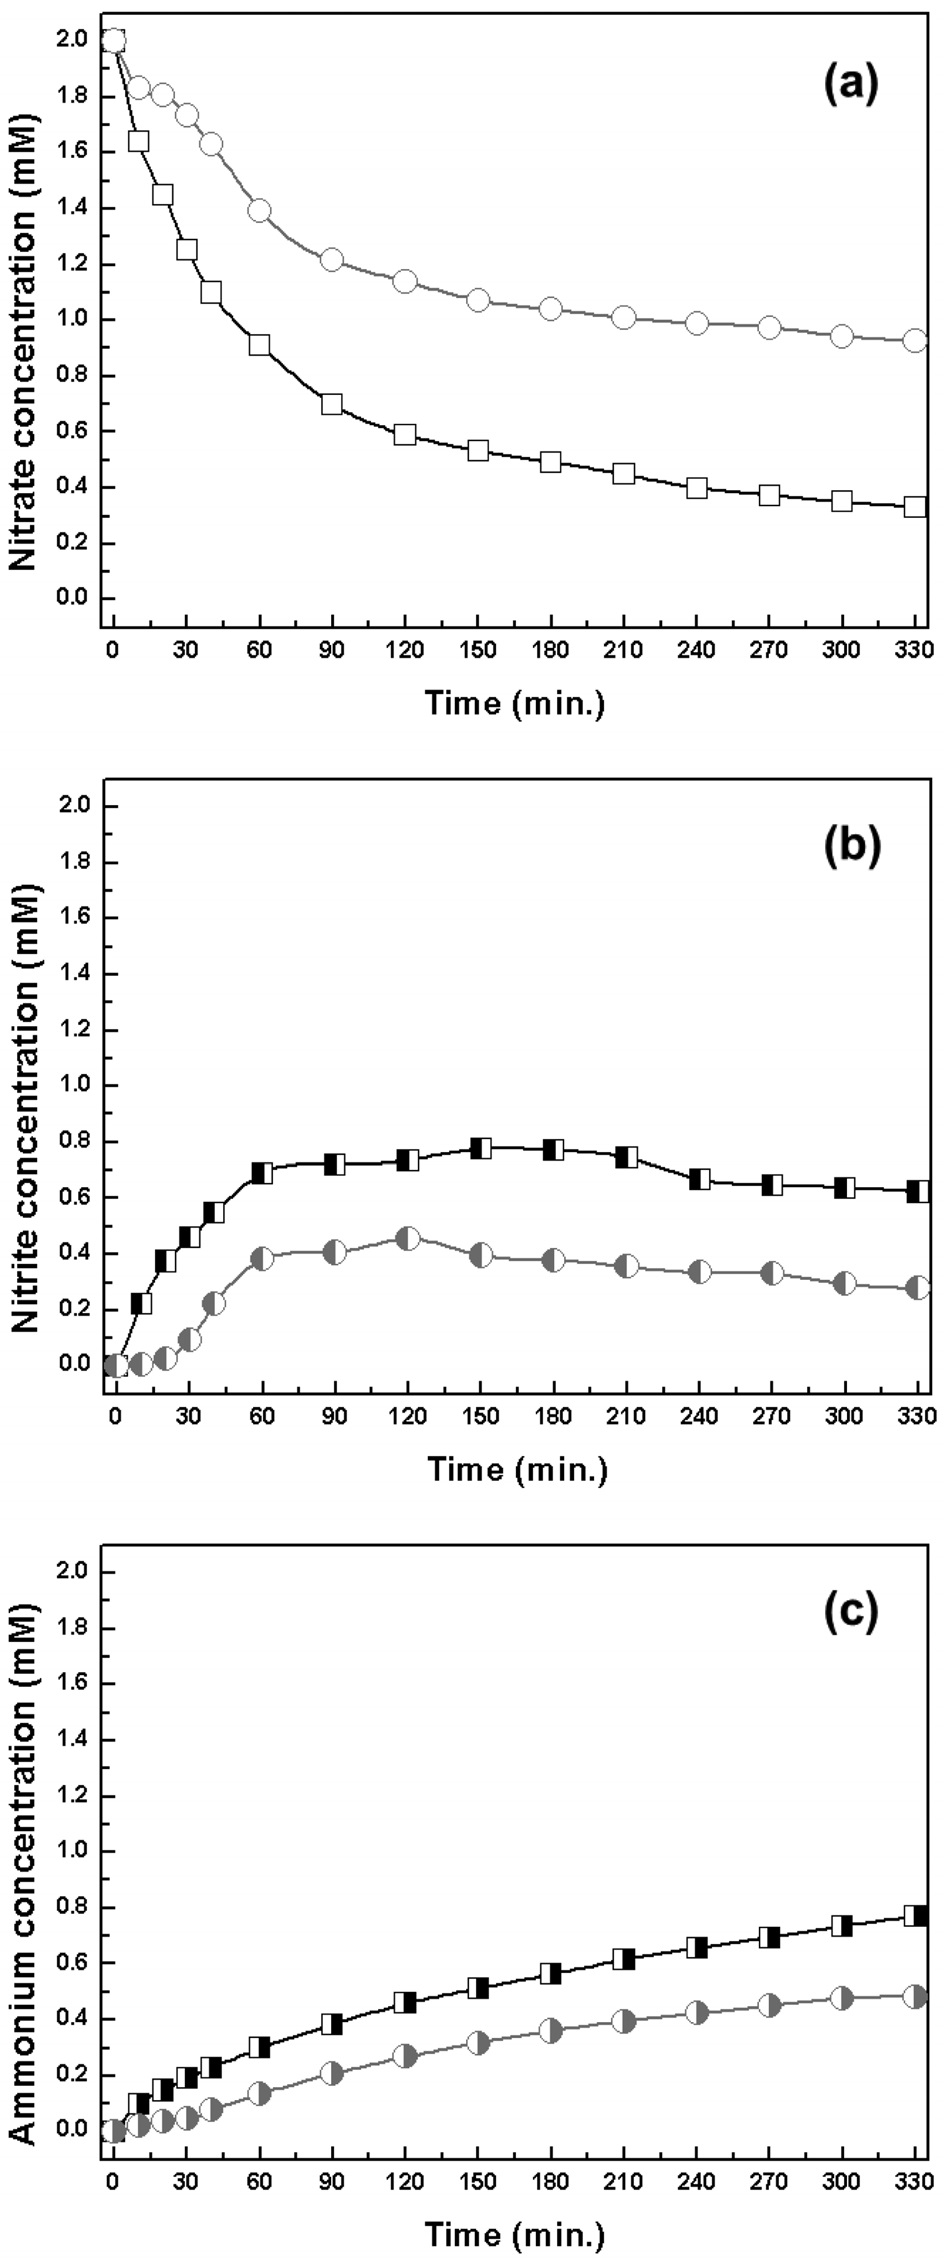 Nitrate (a), nitrite (b) and ammonium (c) concentrations as a function of reaction time for catalytic nitrate reduction without CO2 buffer (□: Pd-Cu/MCM-41, ？: Pd-Cu/ SBA-15).